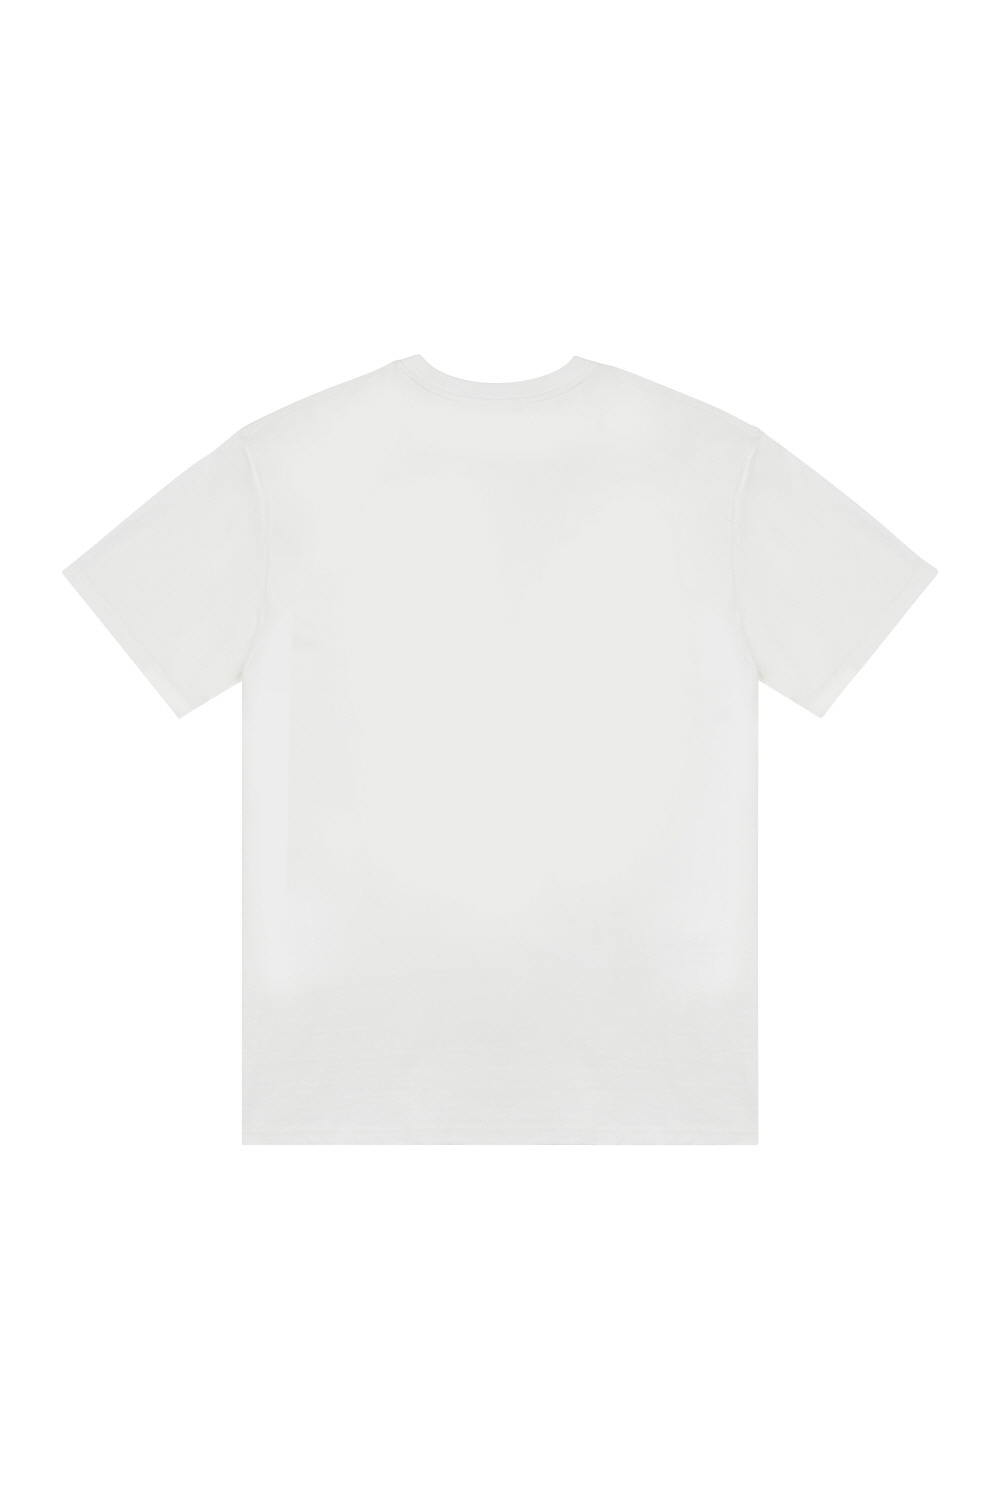 short sleeved tee white color image-S11L2